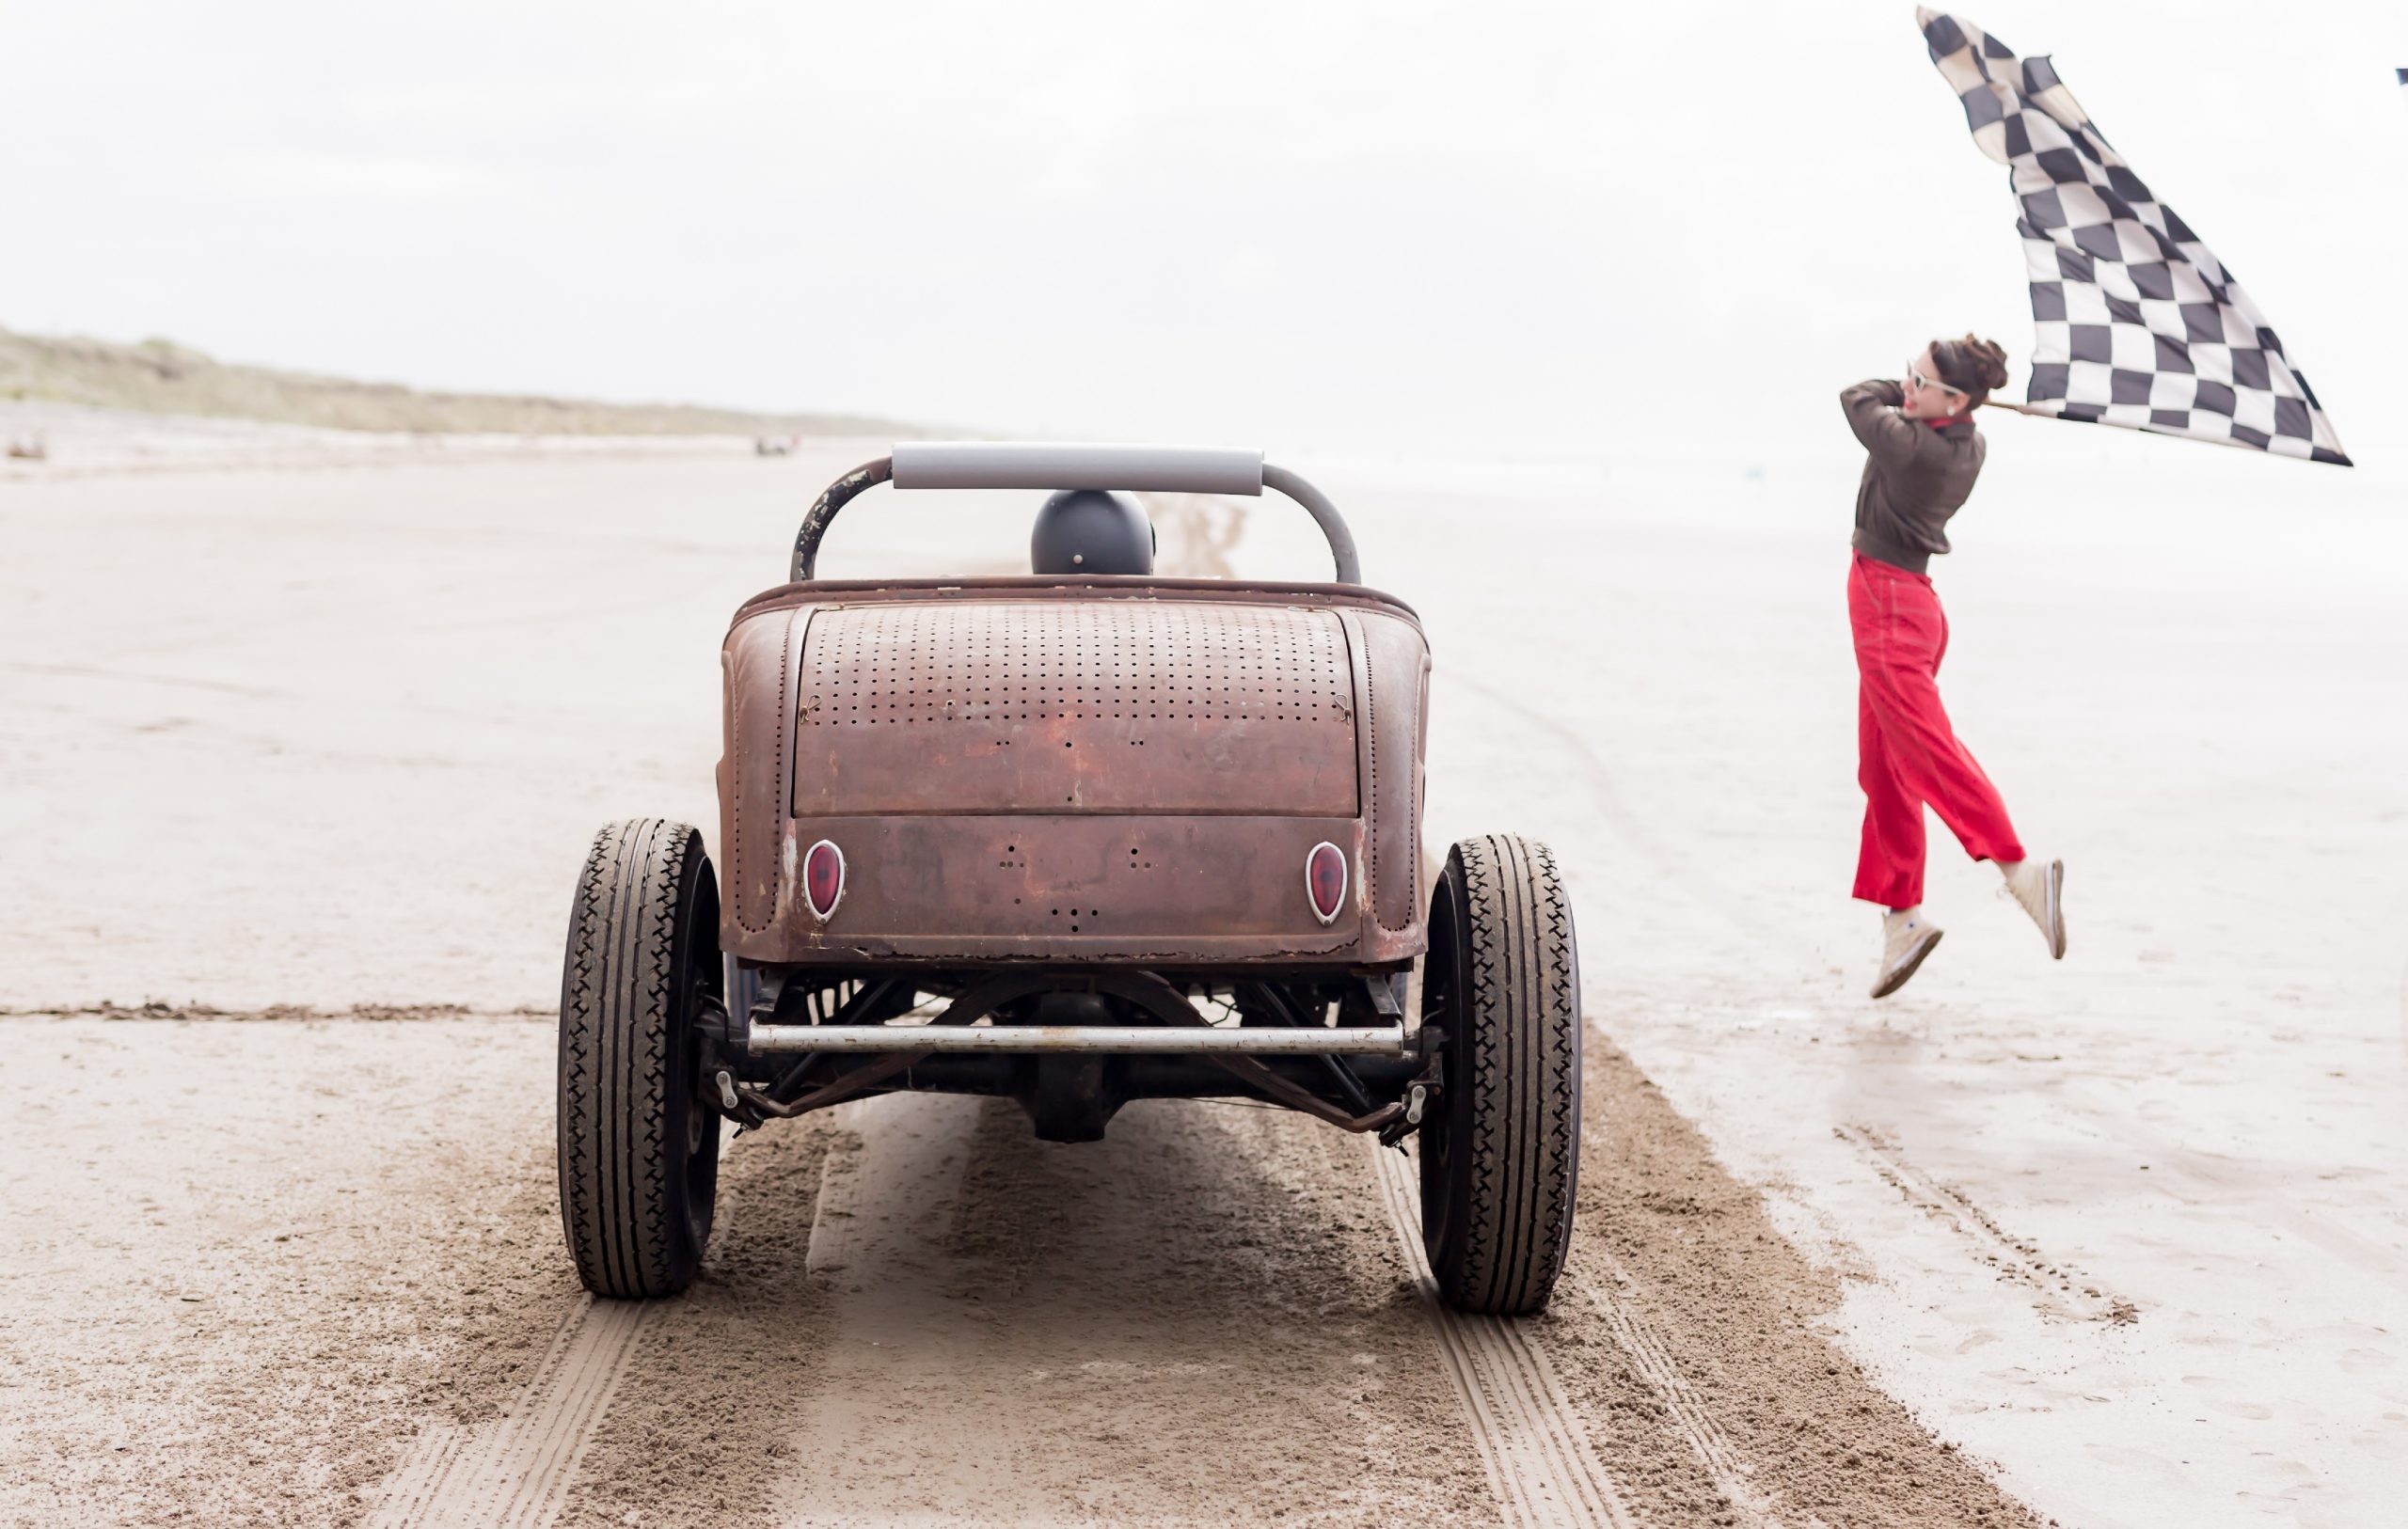 Sand storm: The women of speed tackling Pendine Sands in hot rods